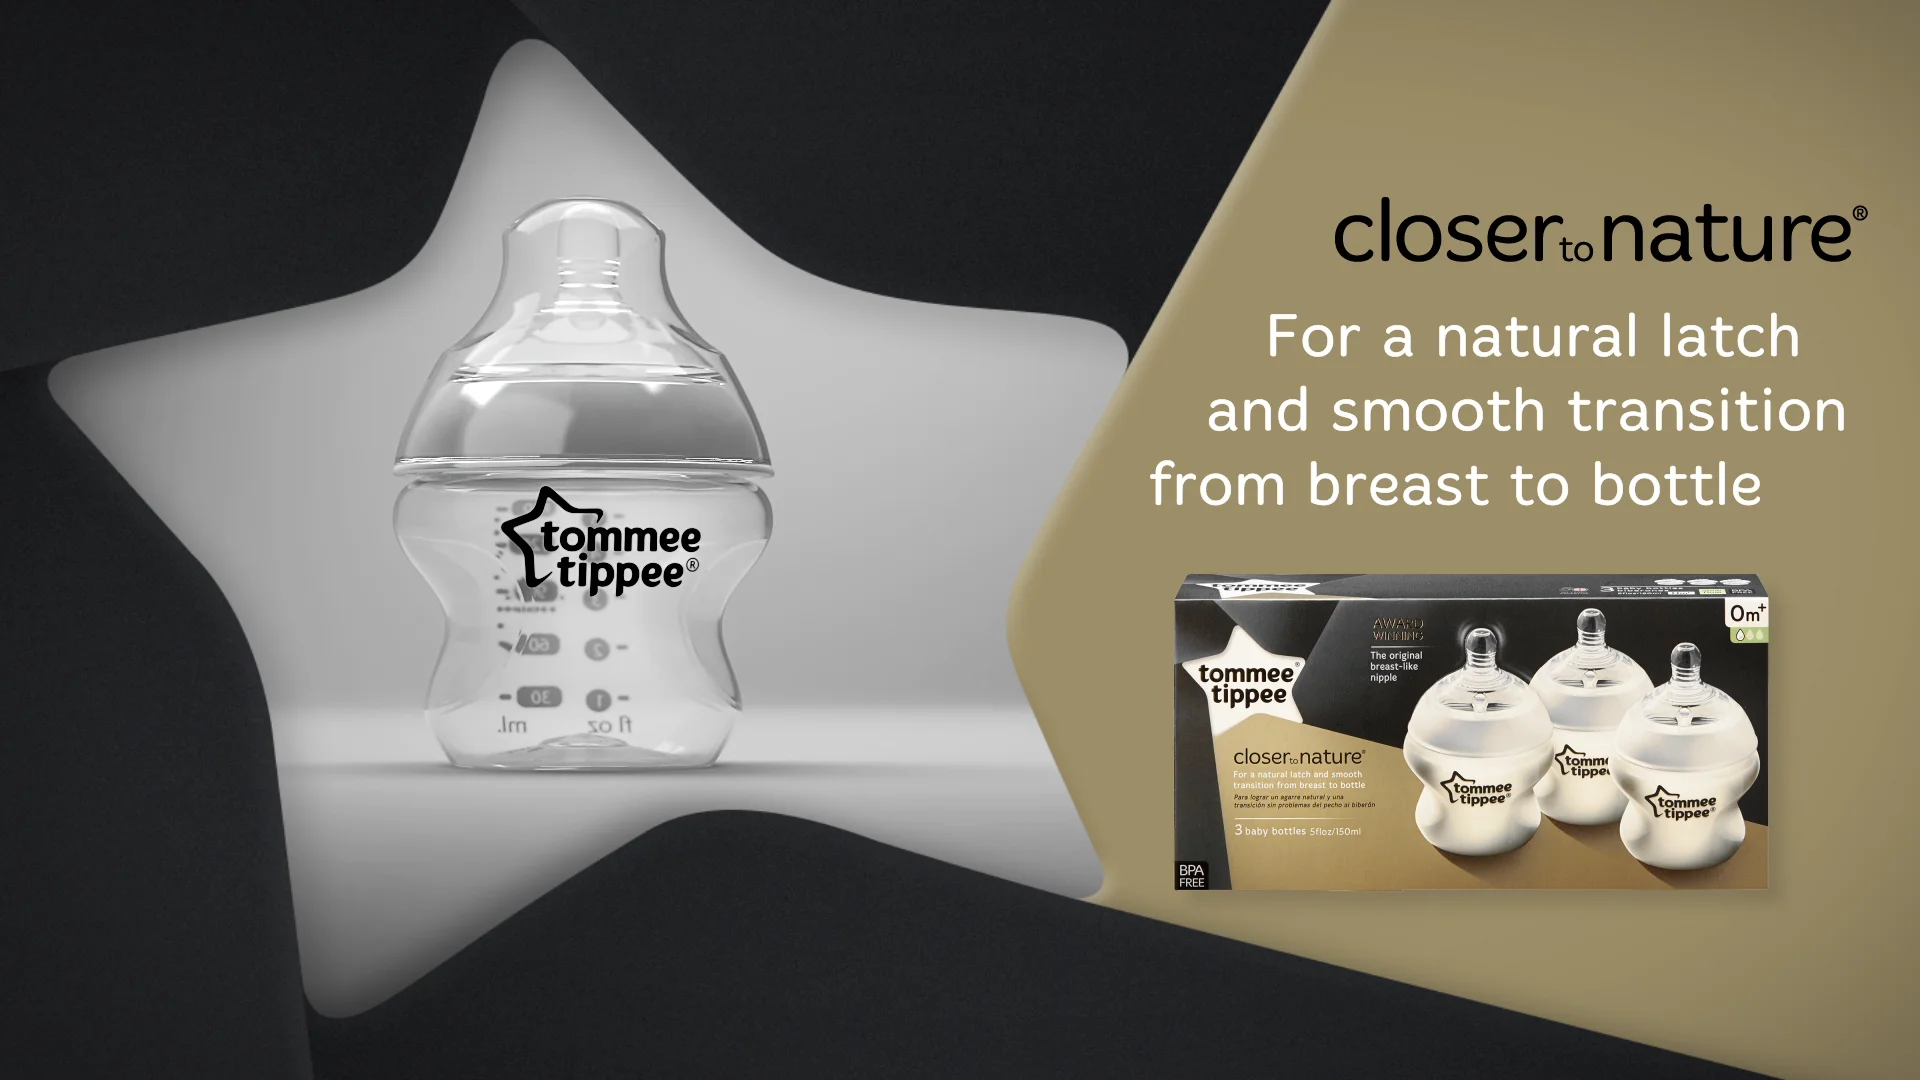 How the Tommee Tippee feeding bottle works on Vimeo